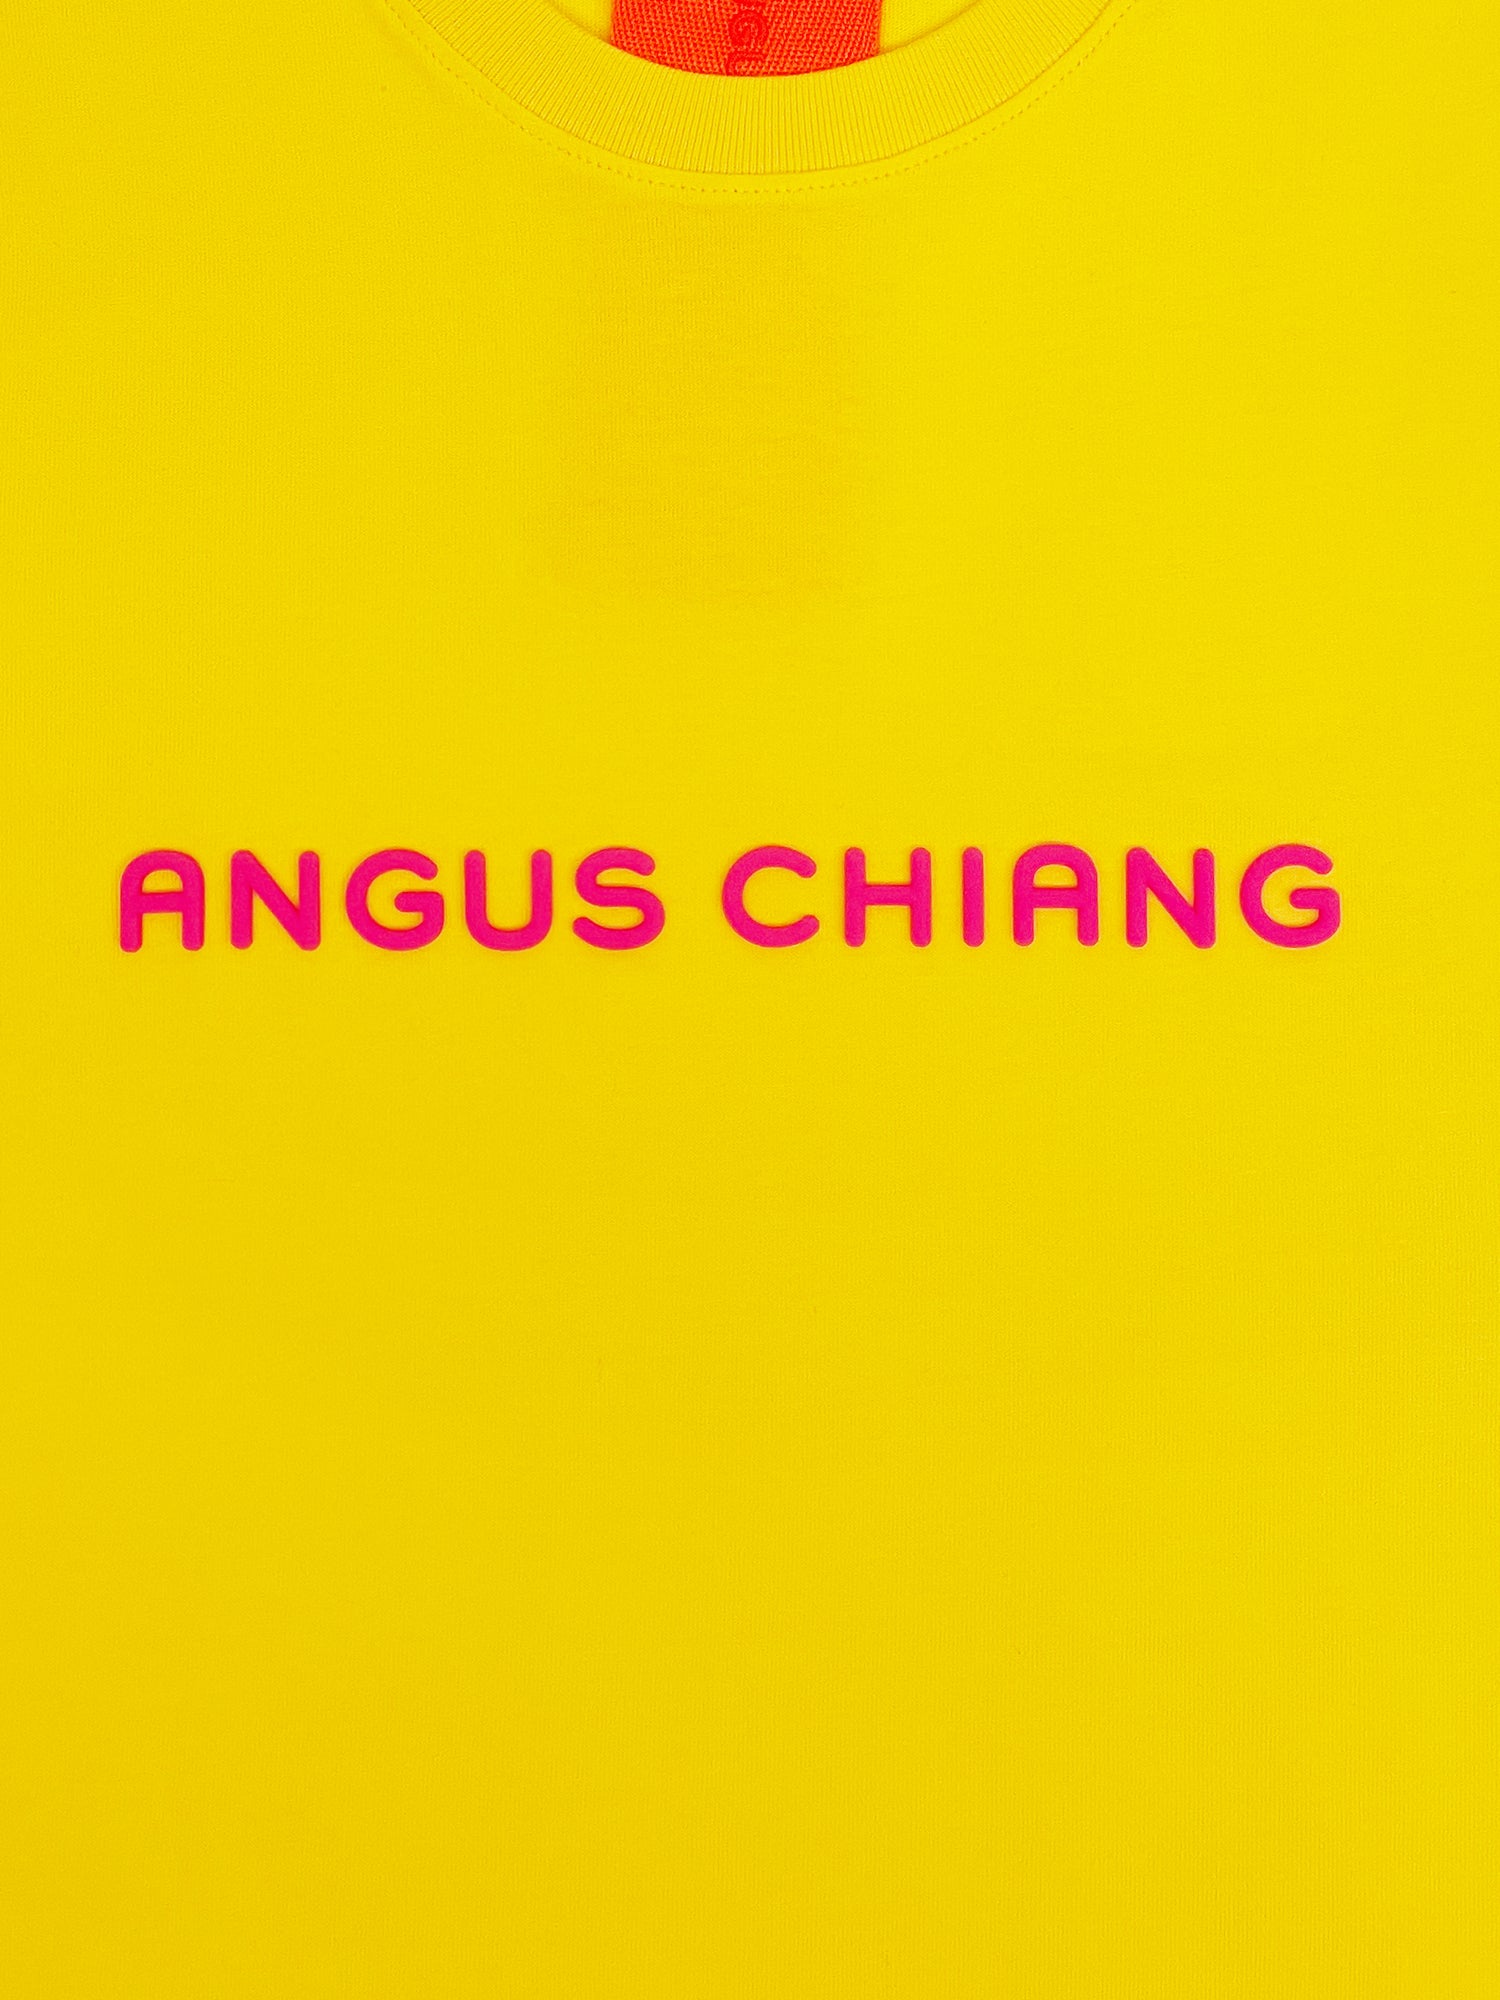 [ 517 LOVE WINS PROJECT ] ANGUS CHIANG  CLASSIC LOGO T-SHIRT